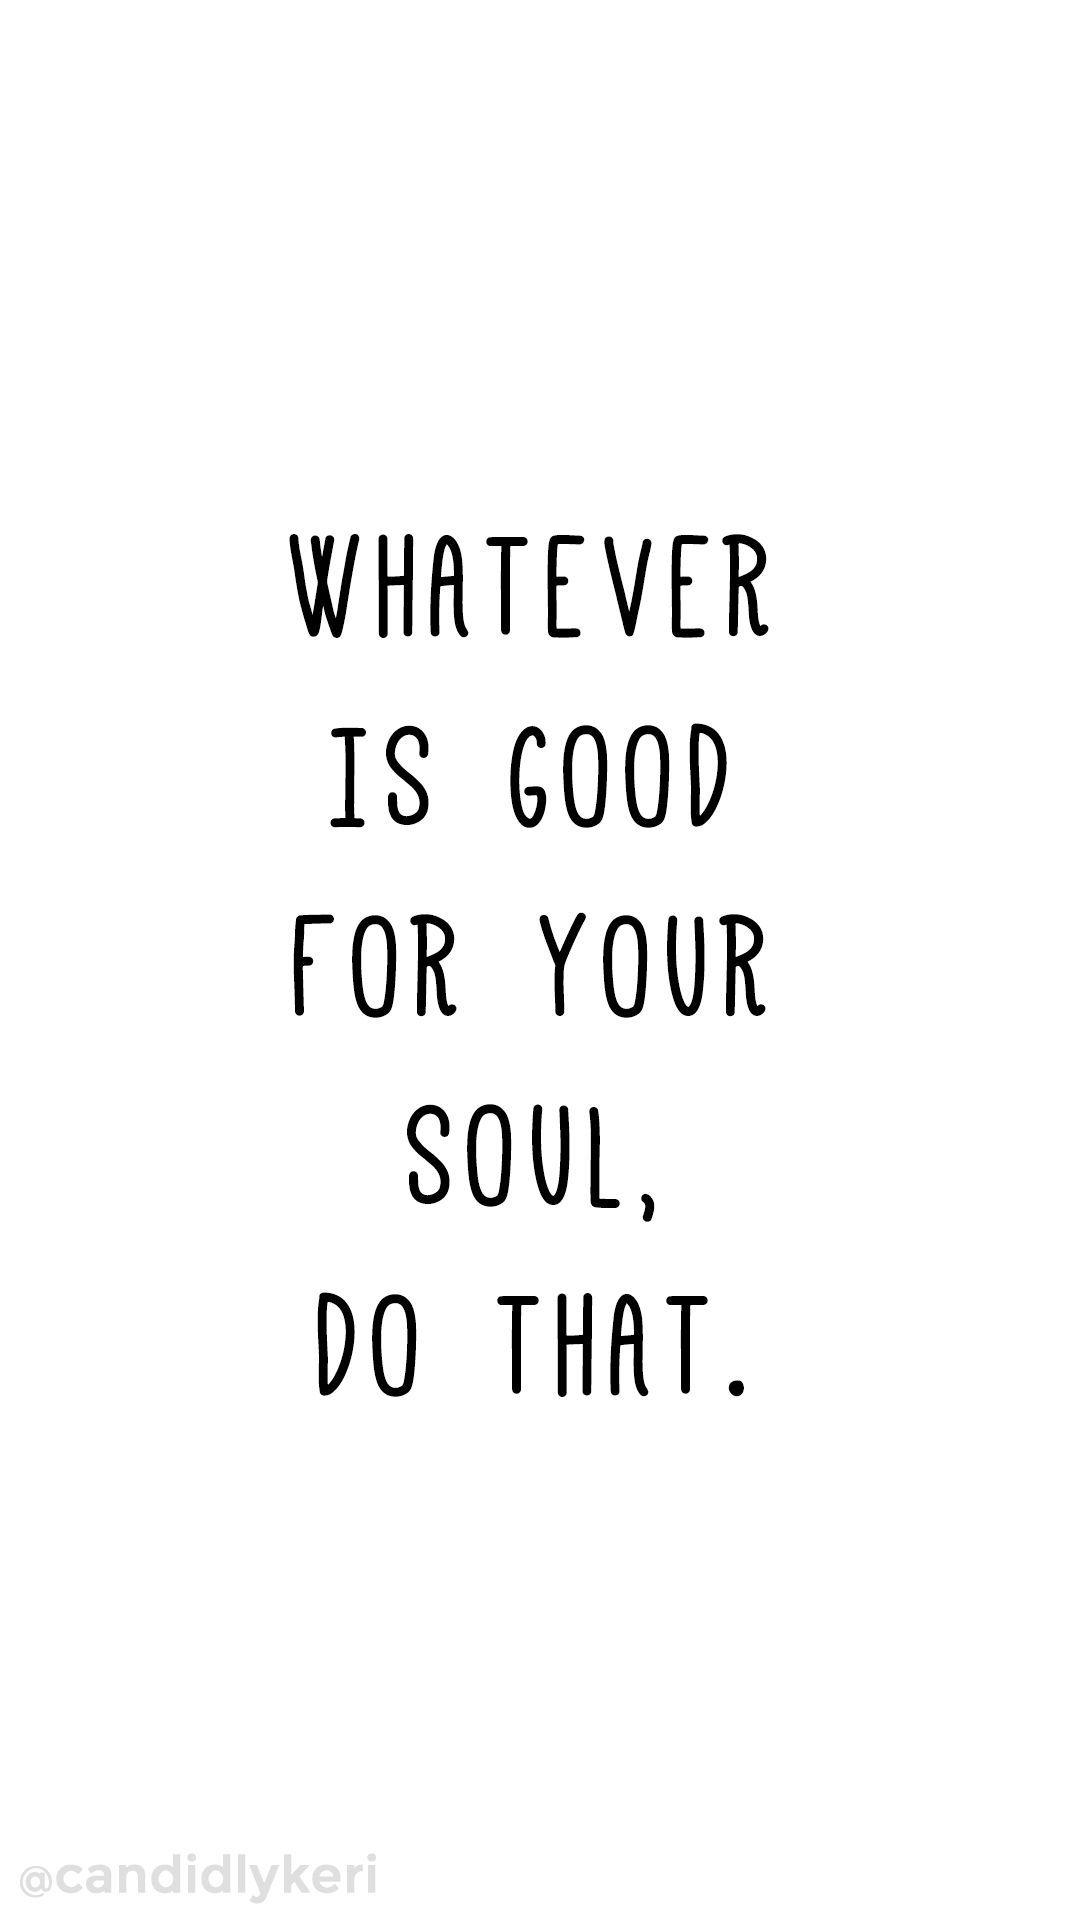 Whatever is good for your soul do that. Quote inspirational